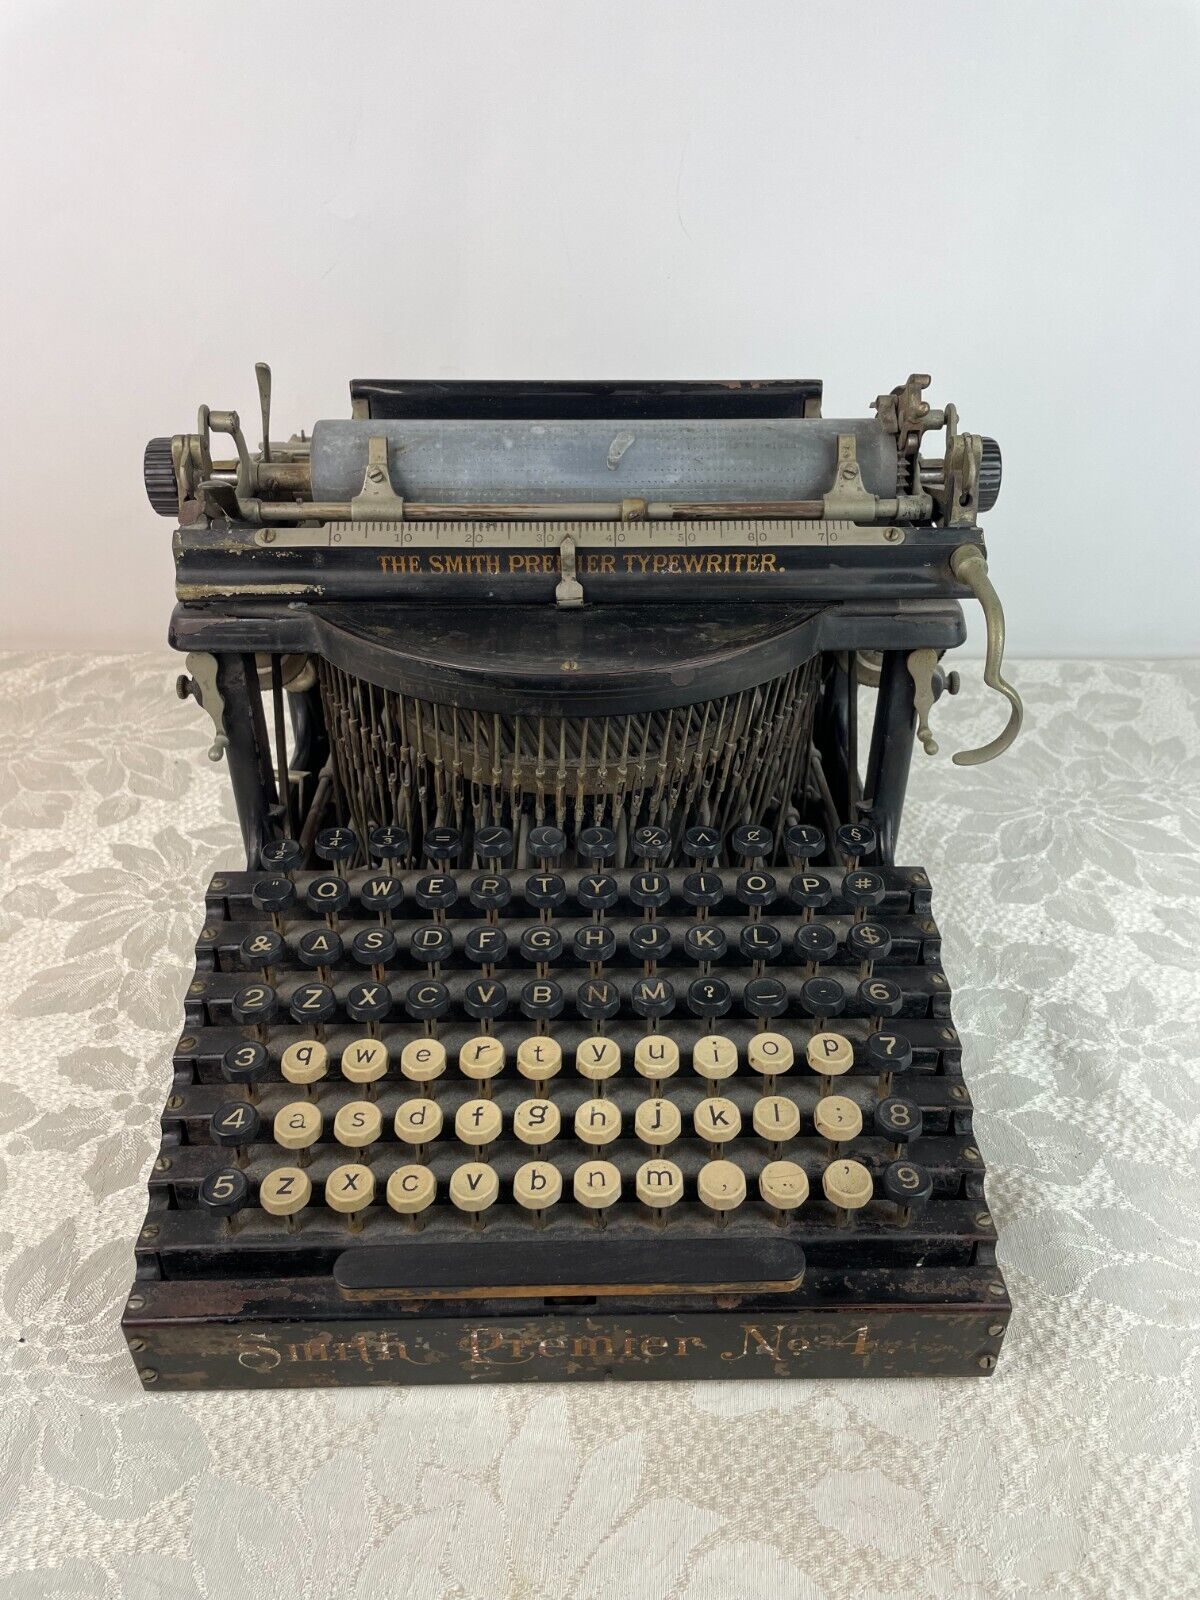 Antique 1890s Smith Premier No 4 Typewriter, Works with some issues.